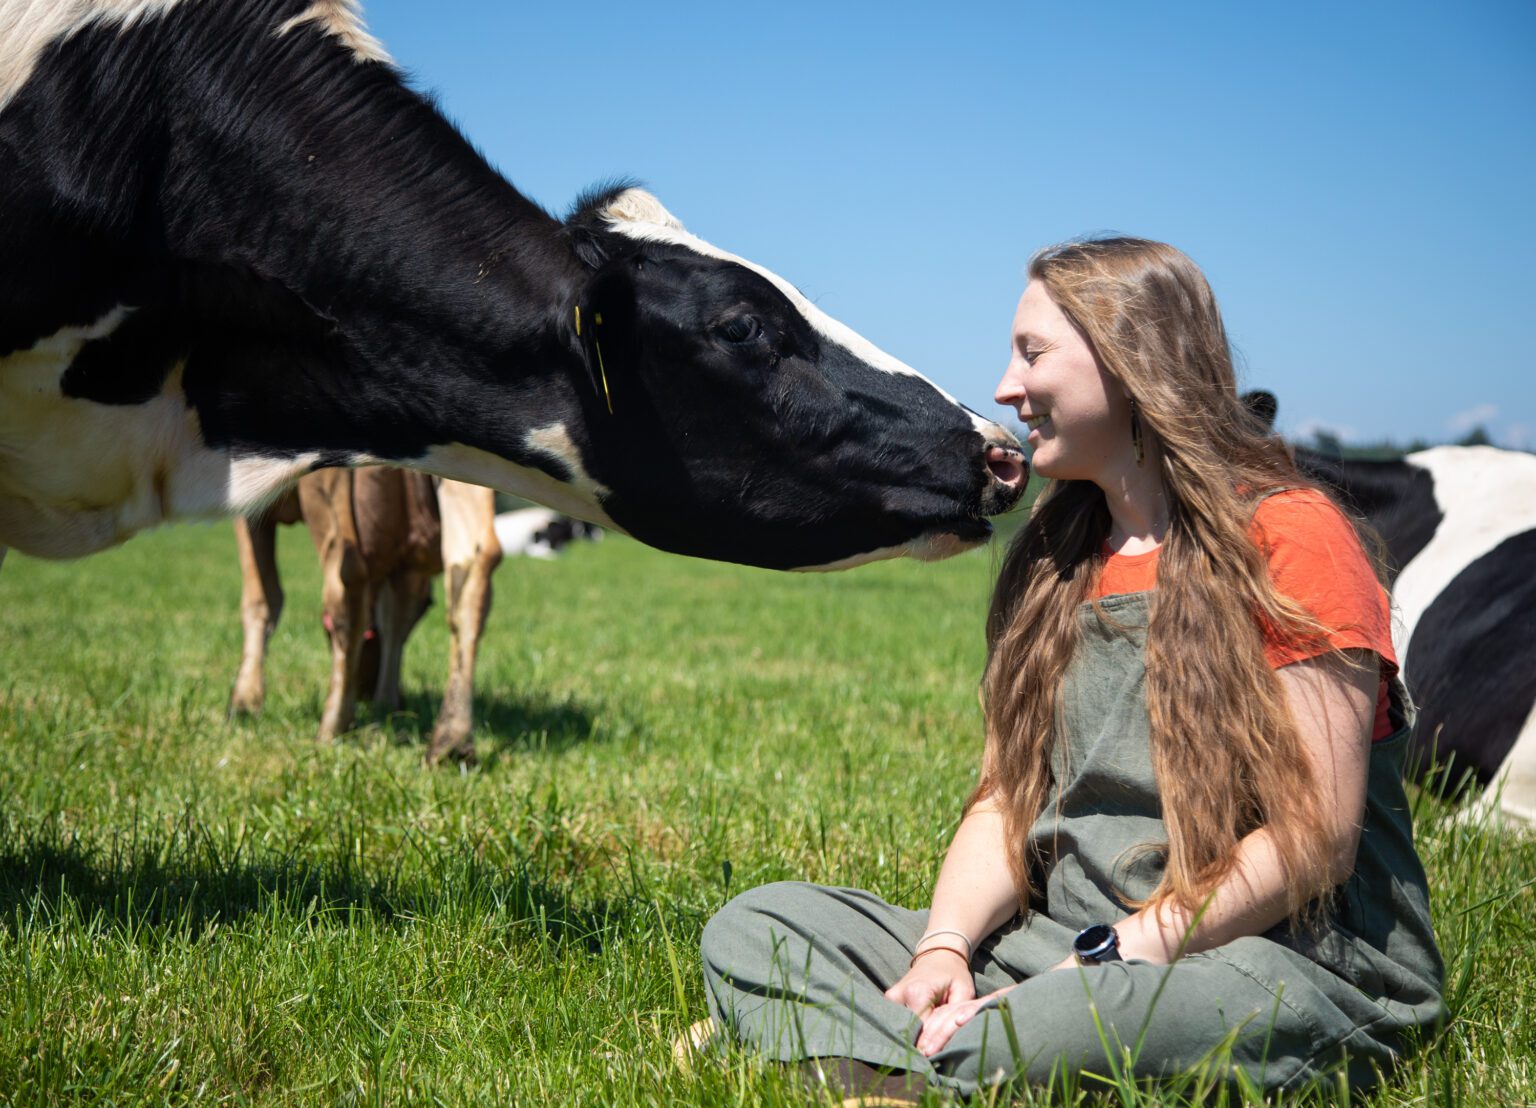 Kate Steensma is greeted by a dairy cow as she sits on the grass.